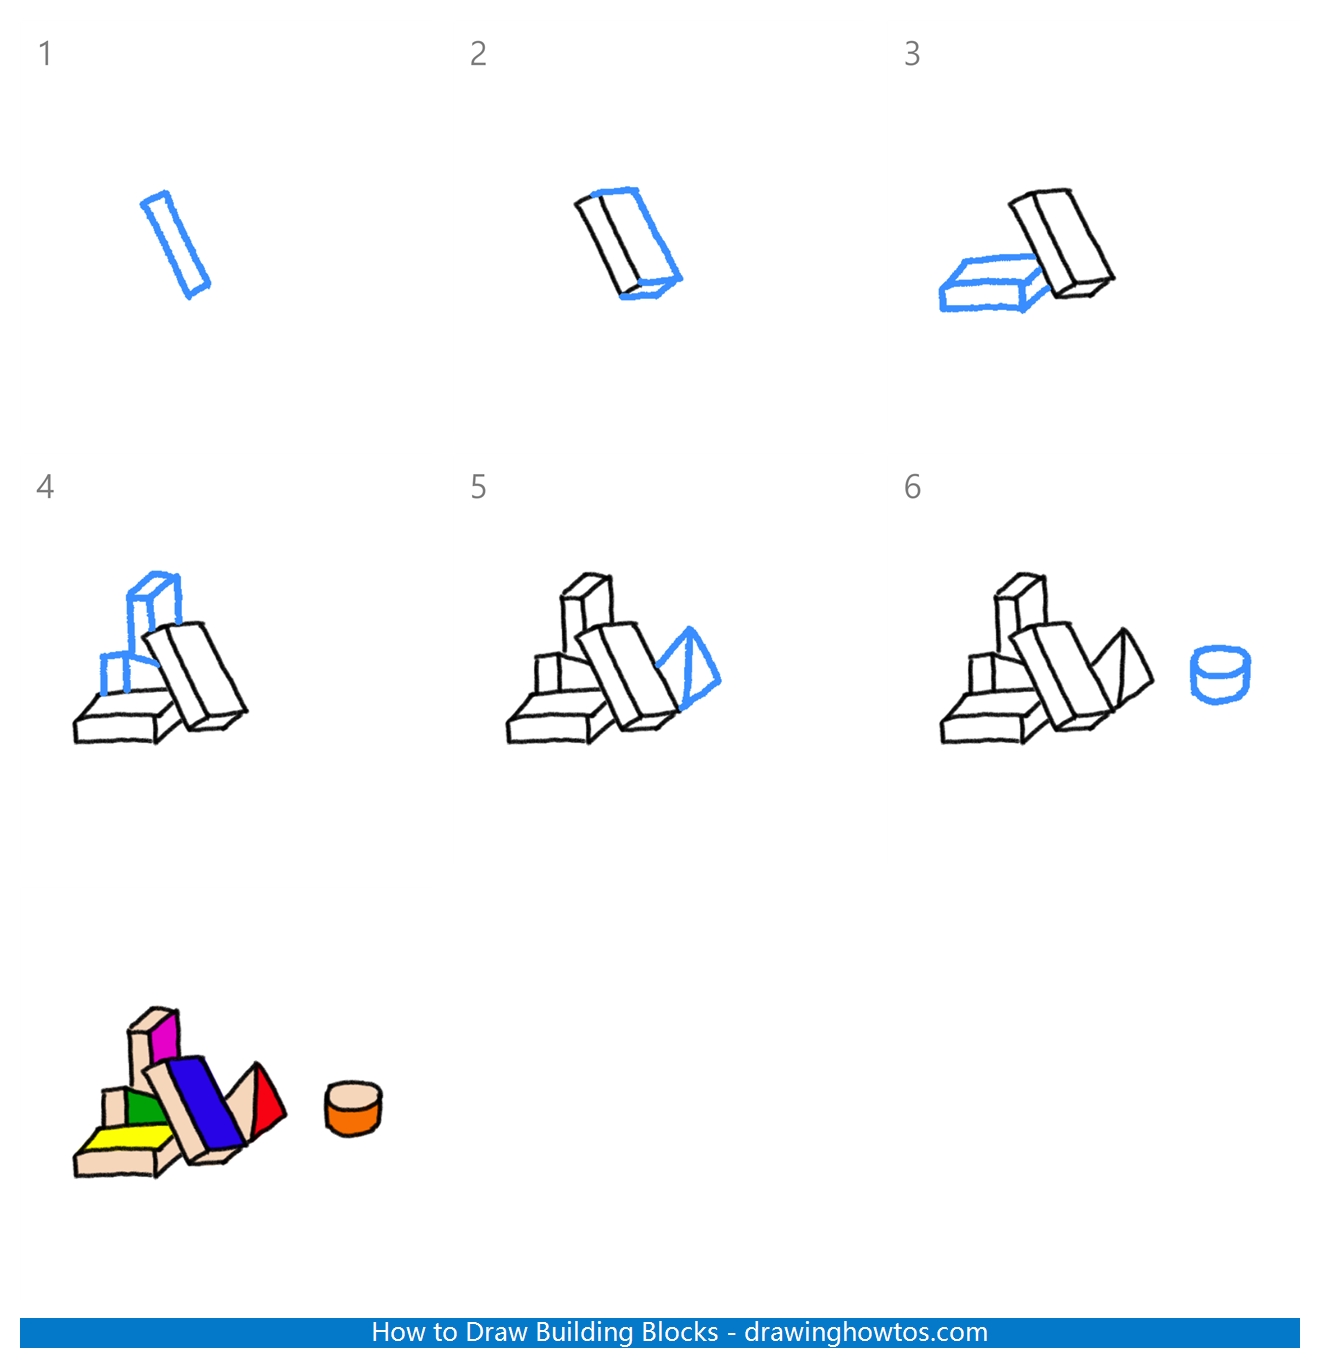 How to Draw Building Blocks Step by Step